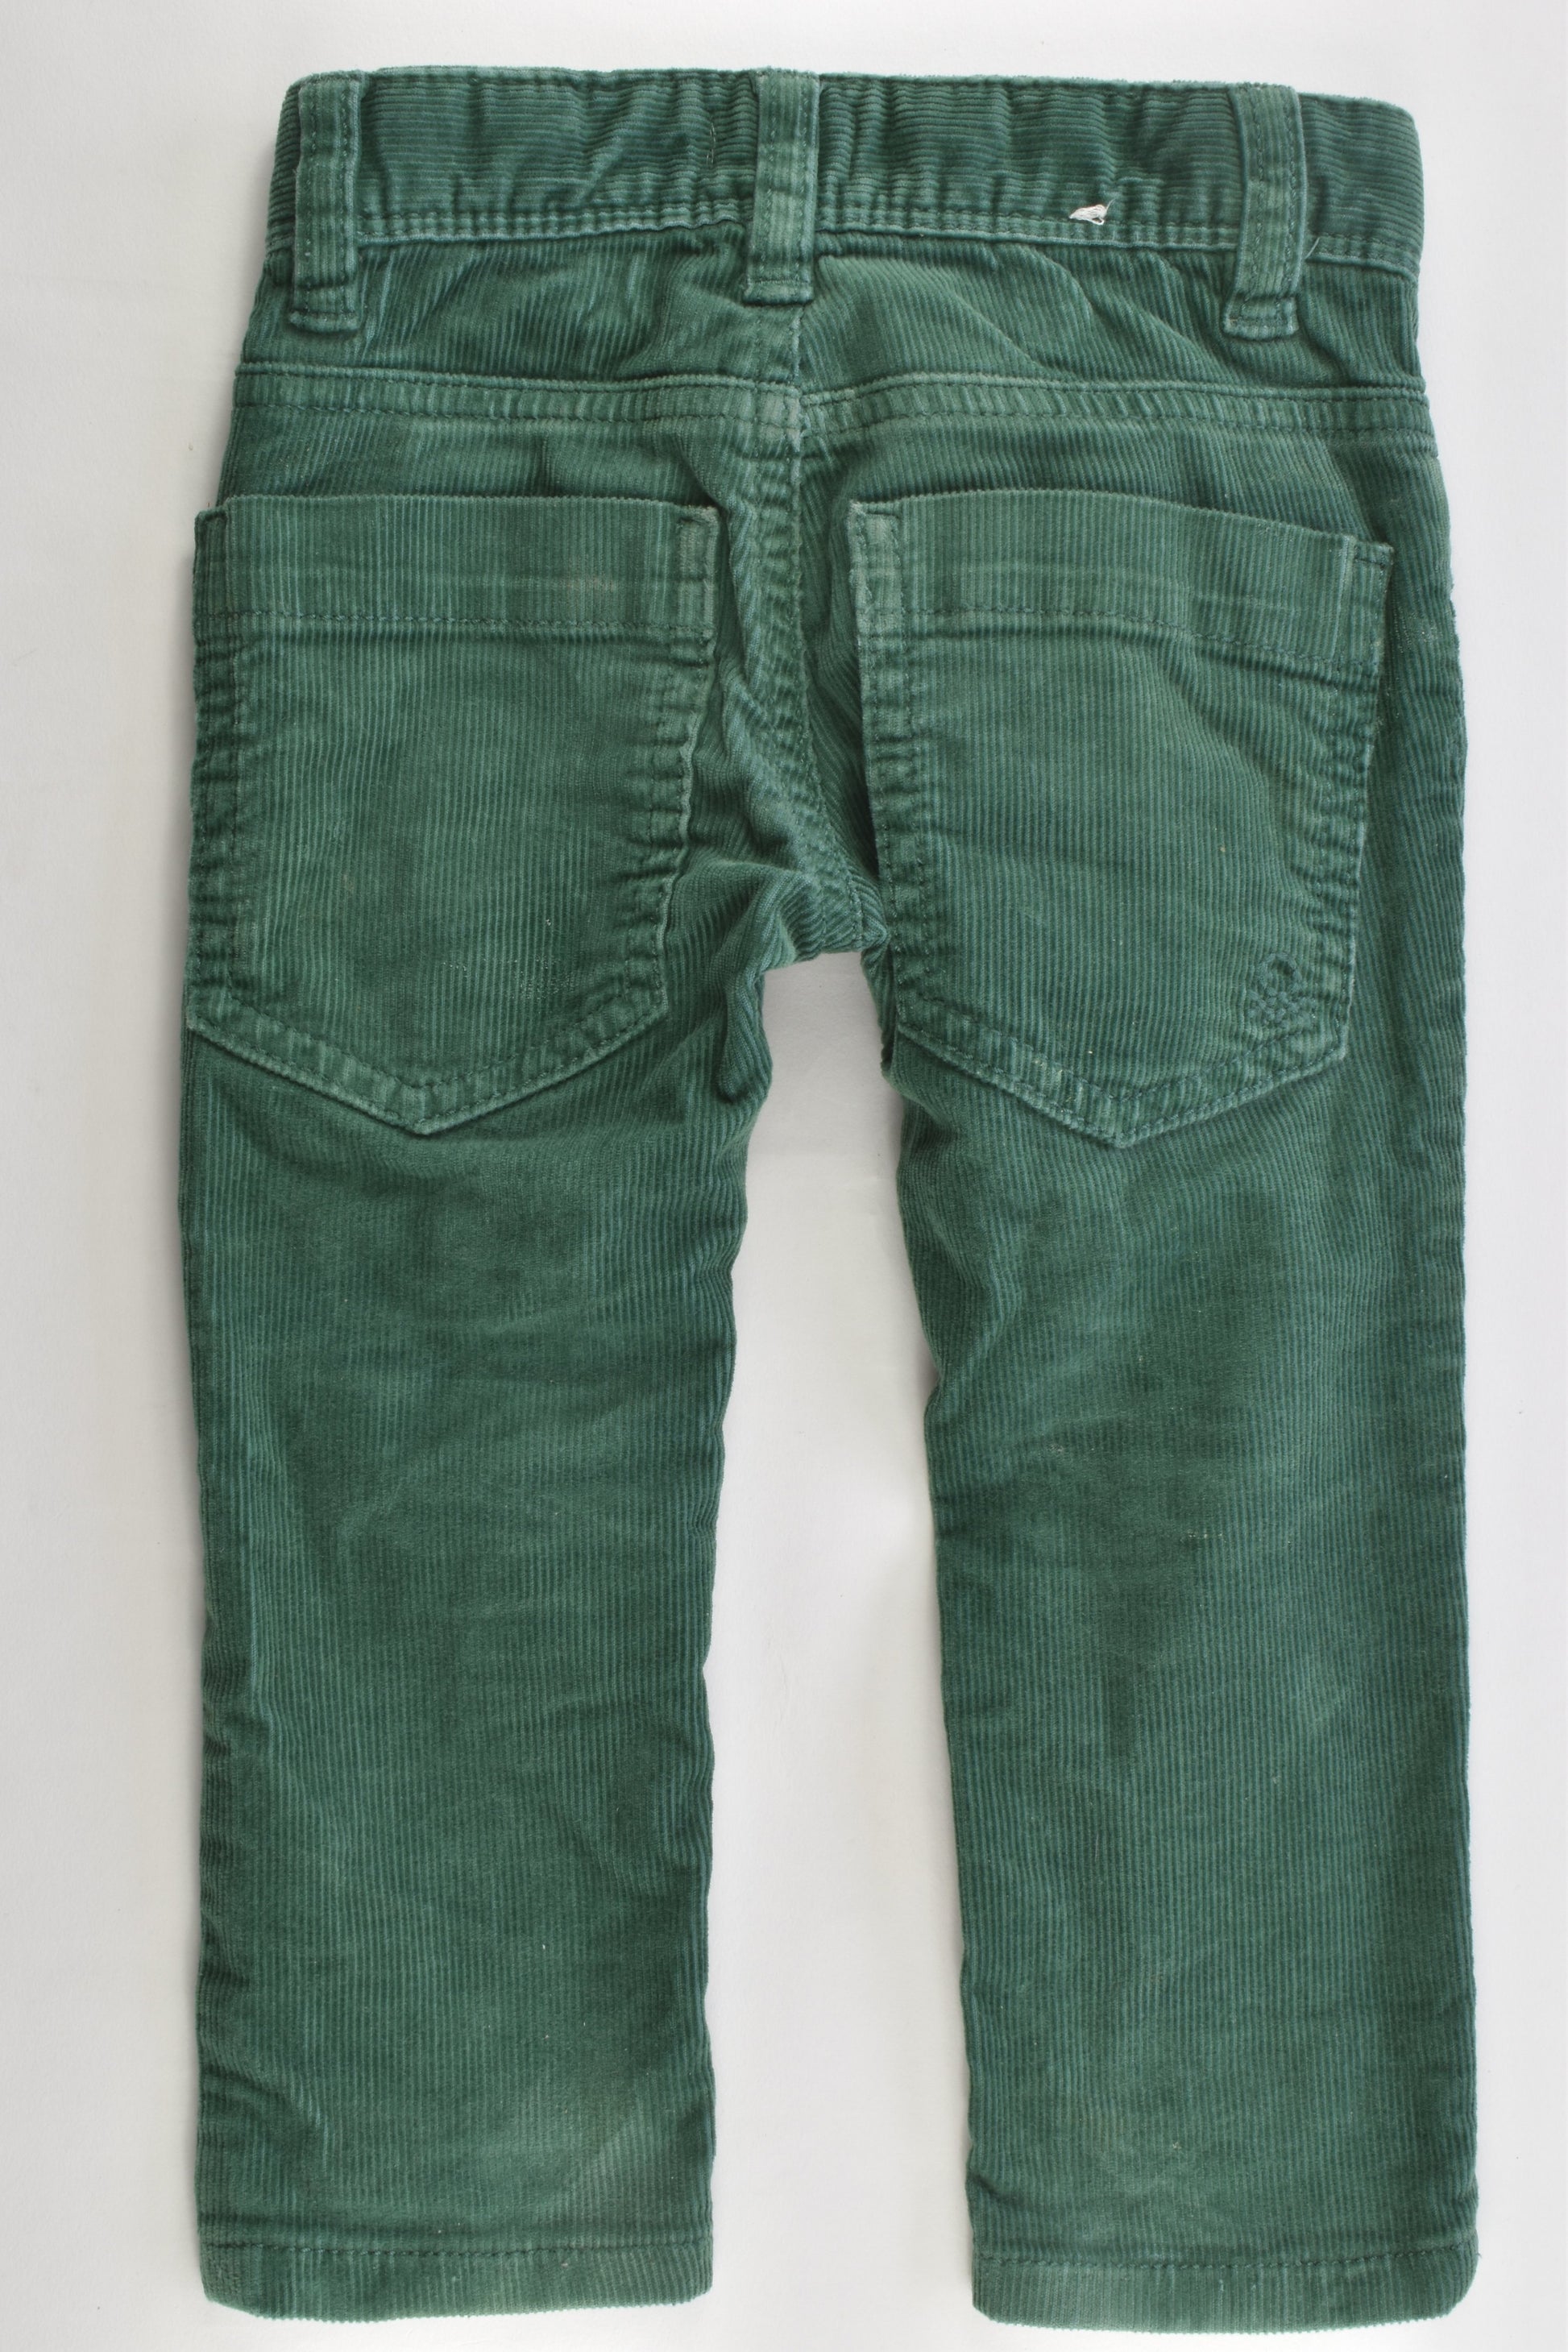 NEW United Colors of Benetton (Italy) Size 1-2 Stretchy Cord Pants